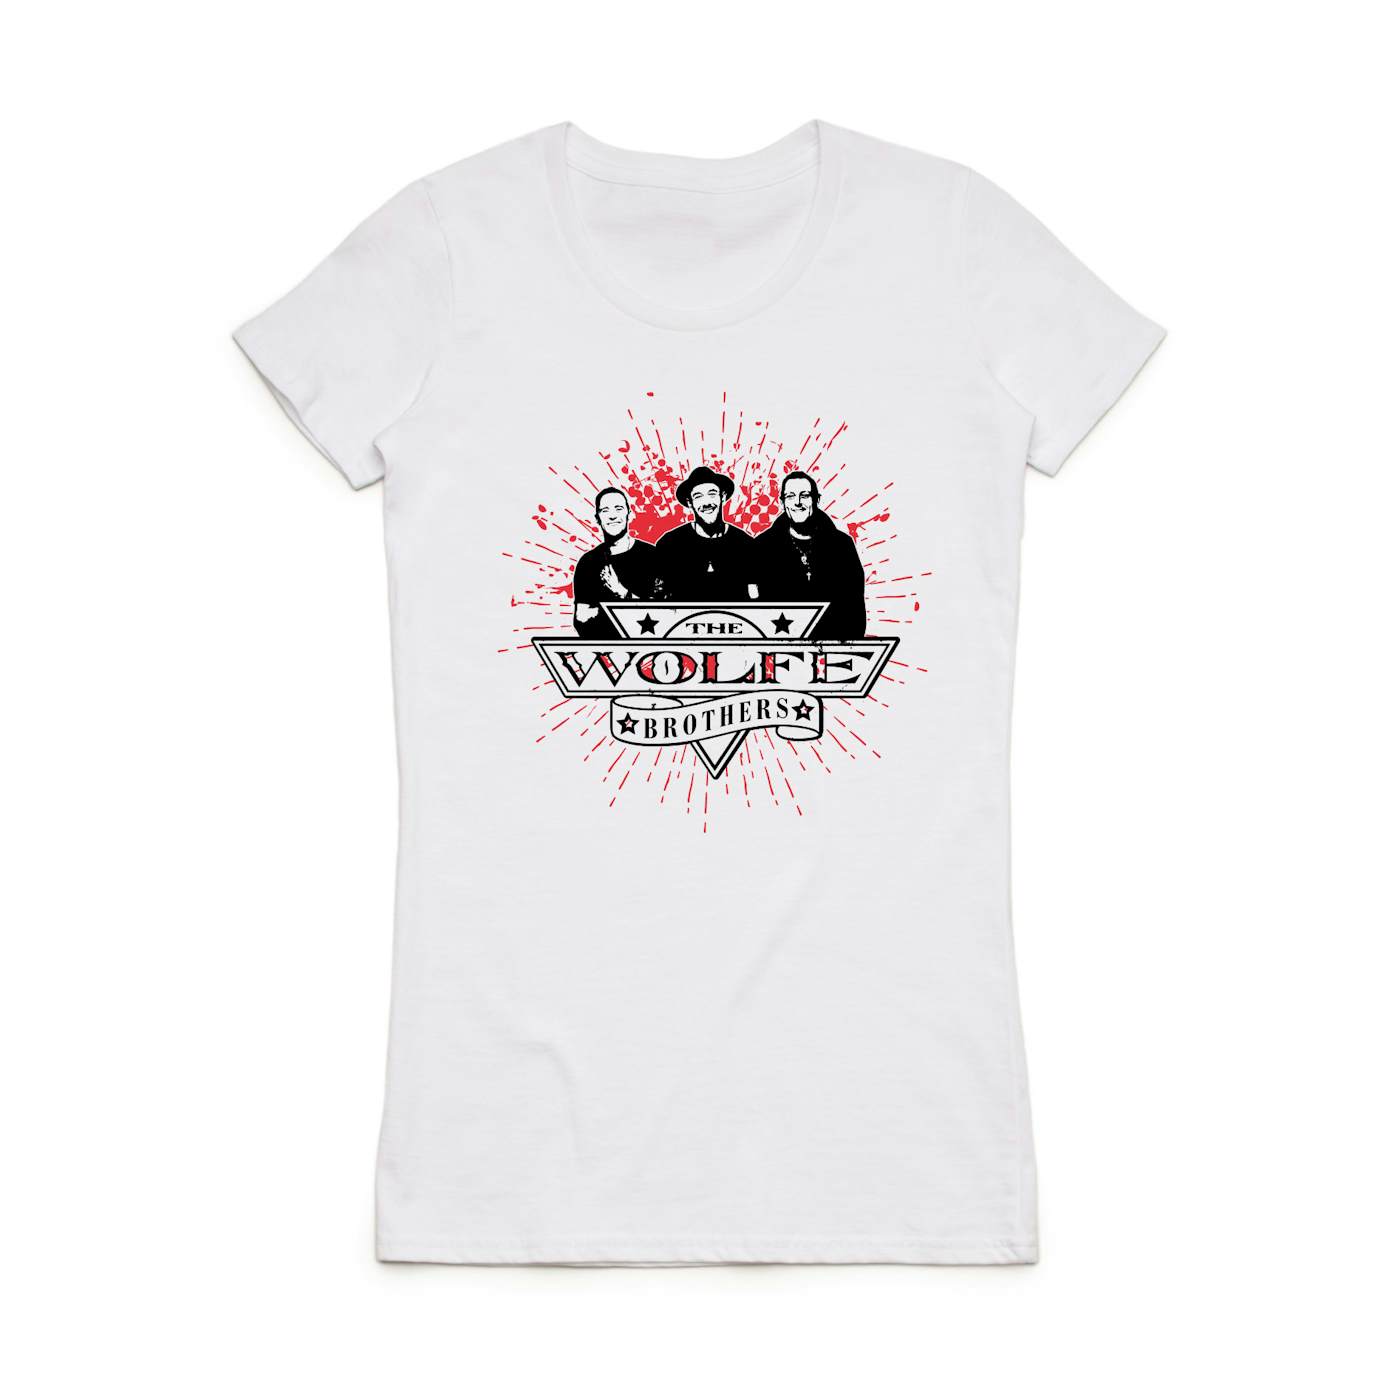 The Wolfe Brothers - Ladies Silhouette White Tee